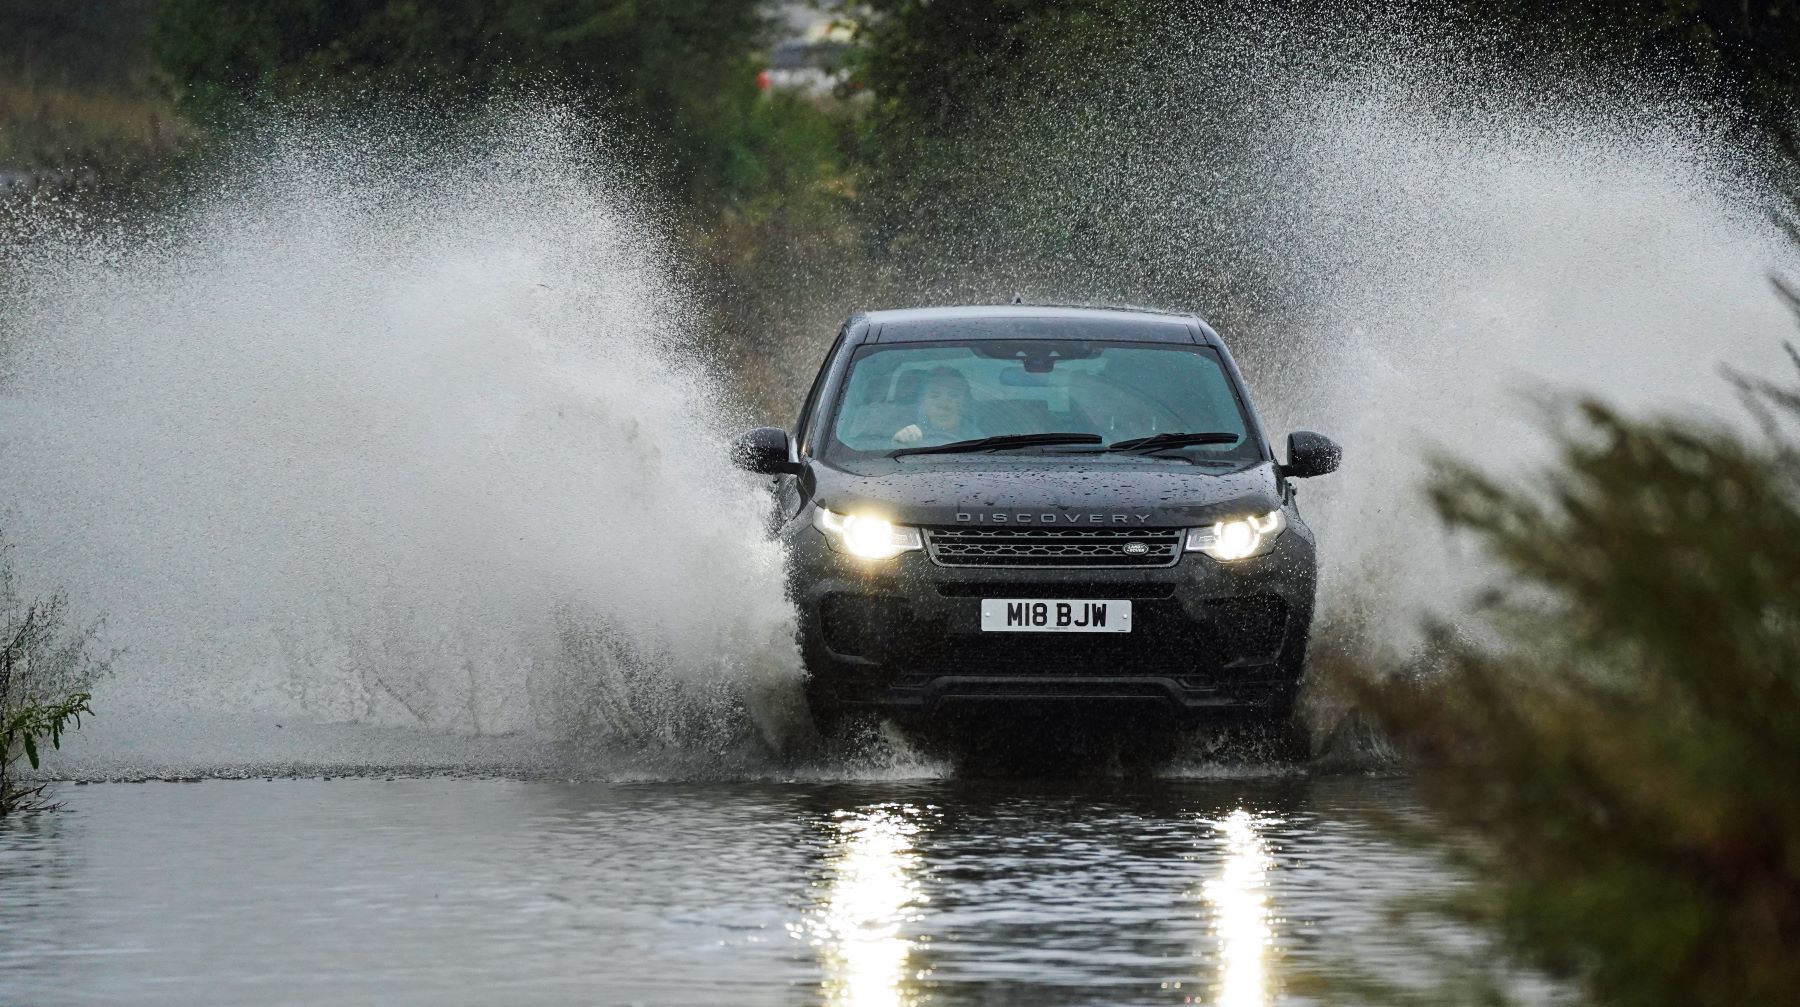 A Land Rover Discovery driving through floodwaters in Whitley Bay, North Tyneside